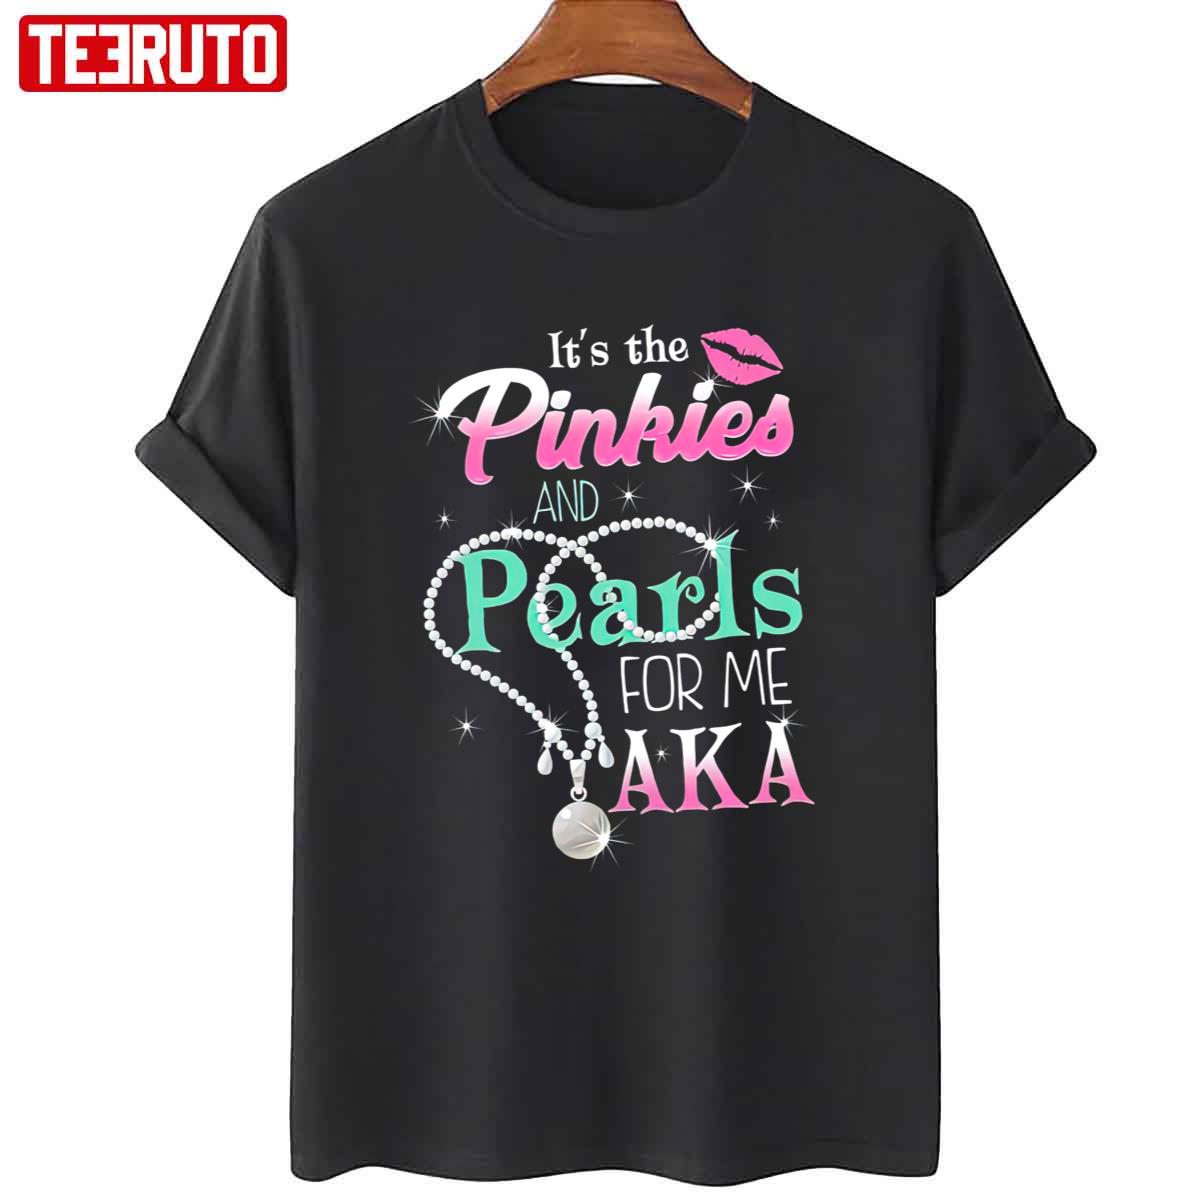 It’s The Pinkies And Pearls For Me Aka Unisex T-Shirt